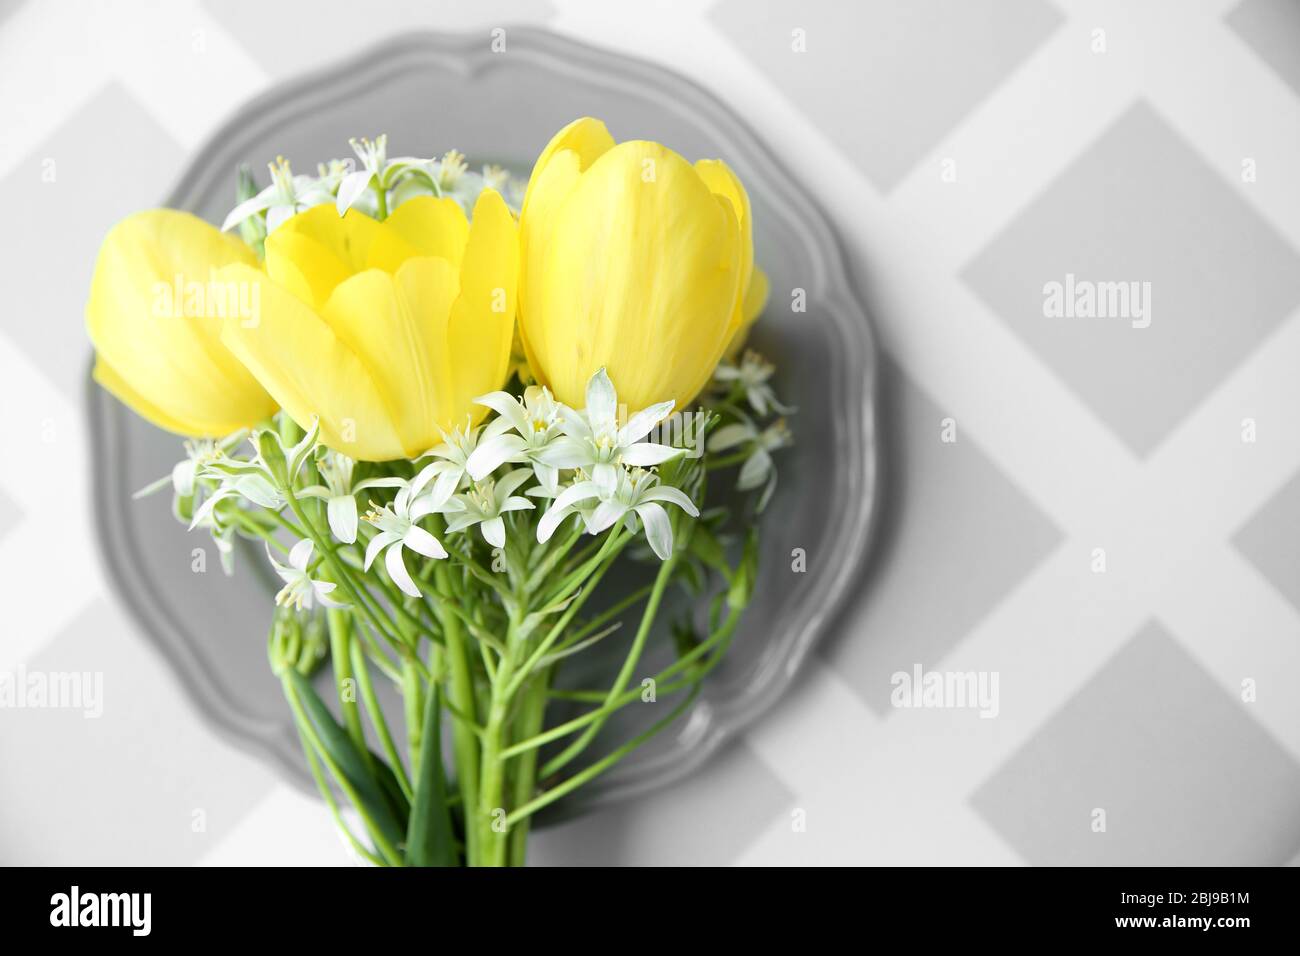 Bouquet of flowers on gray plate Stock Photo